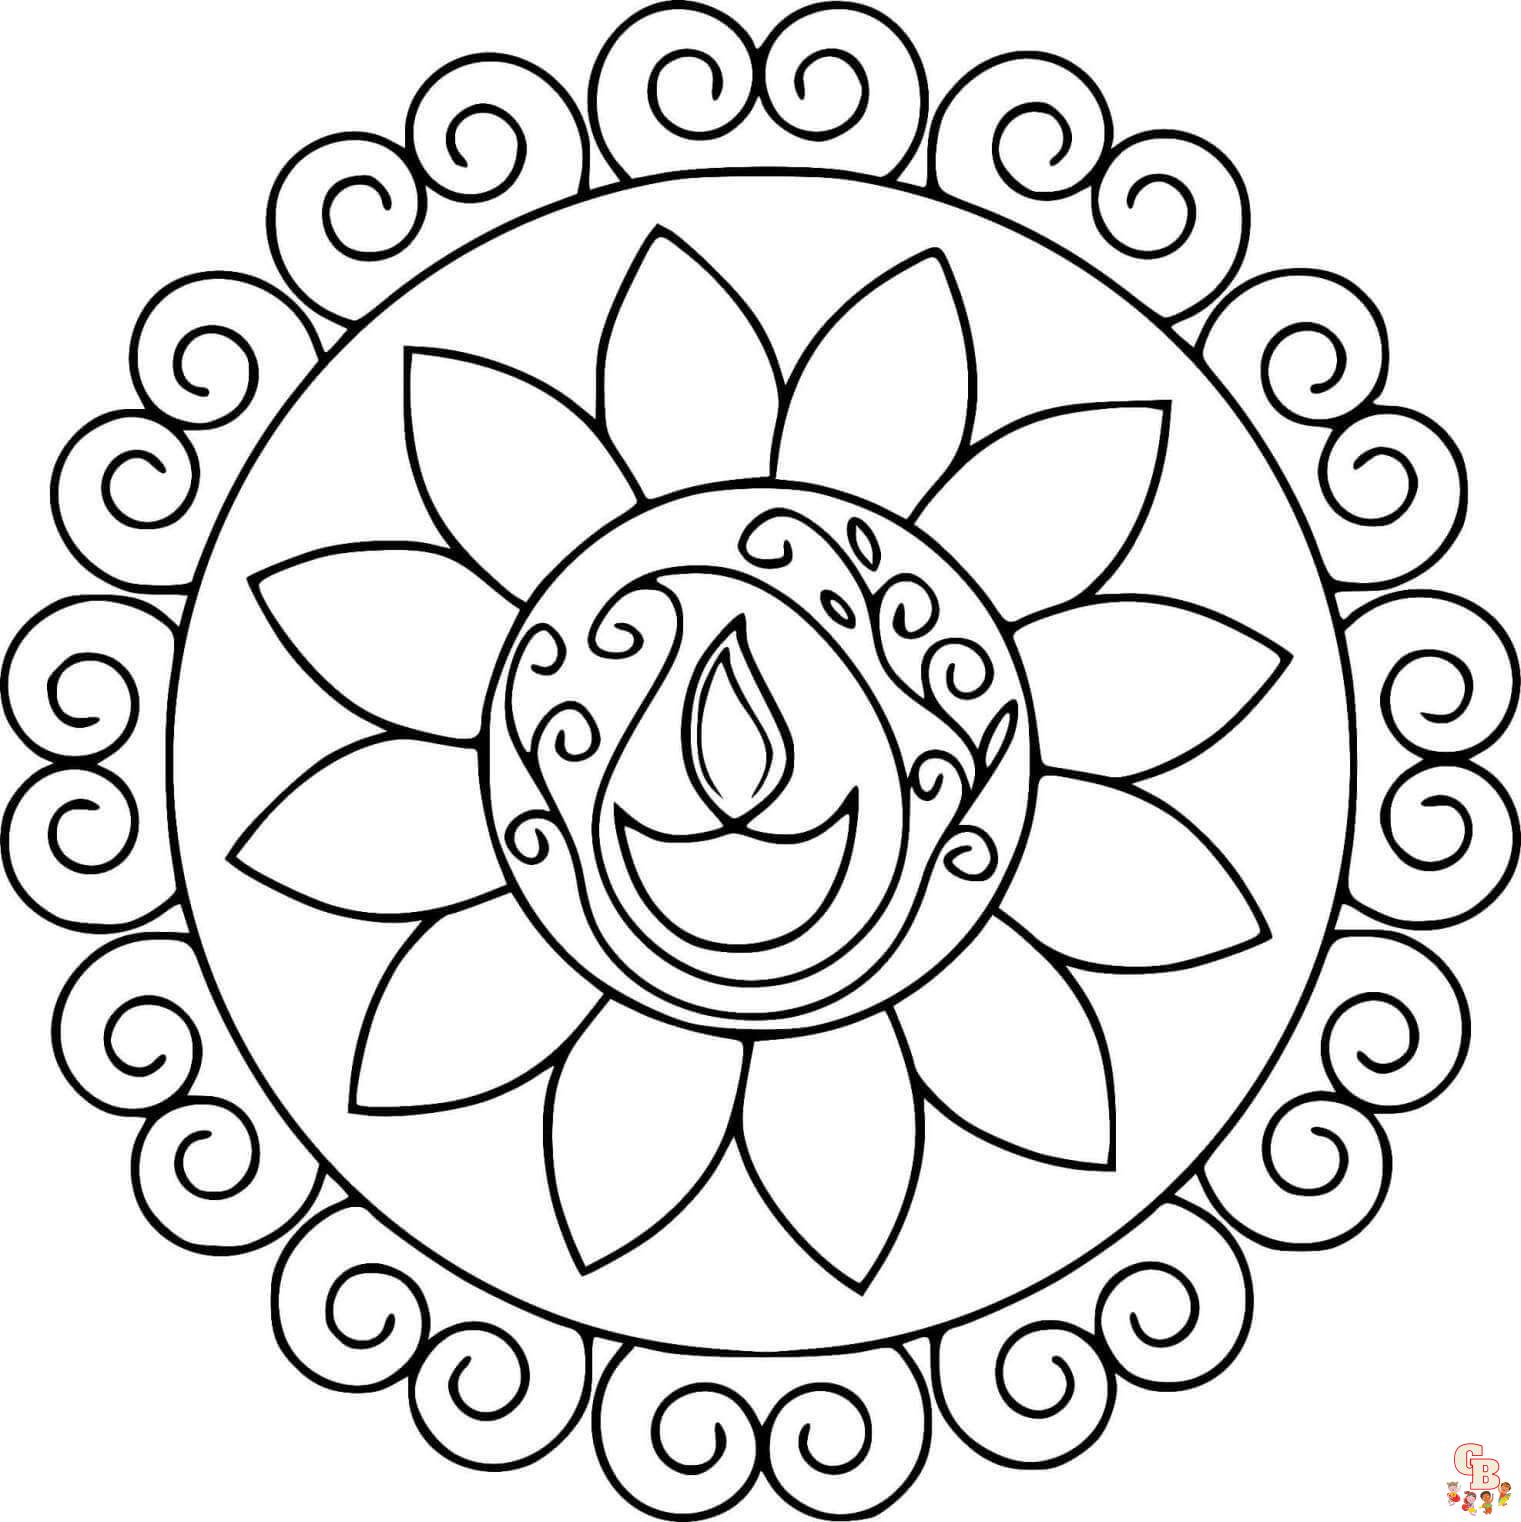 Explore the world of rangoli coloring pages with